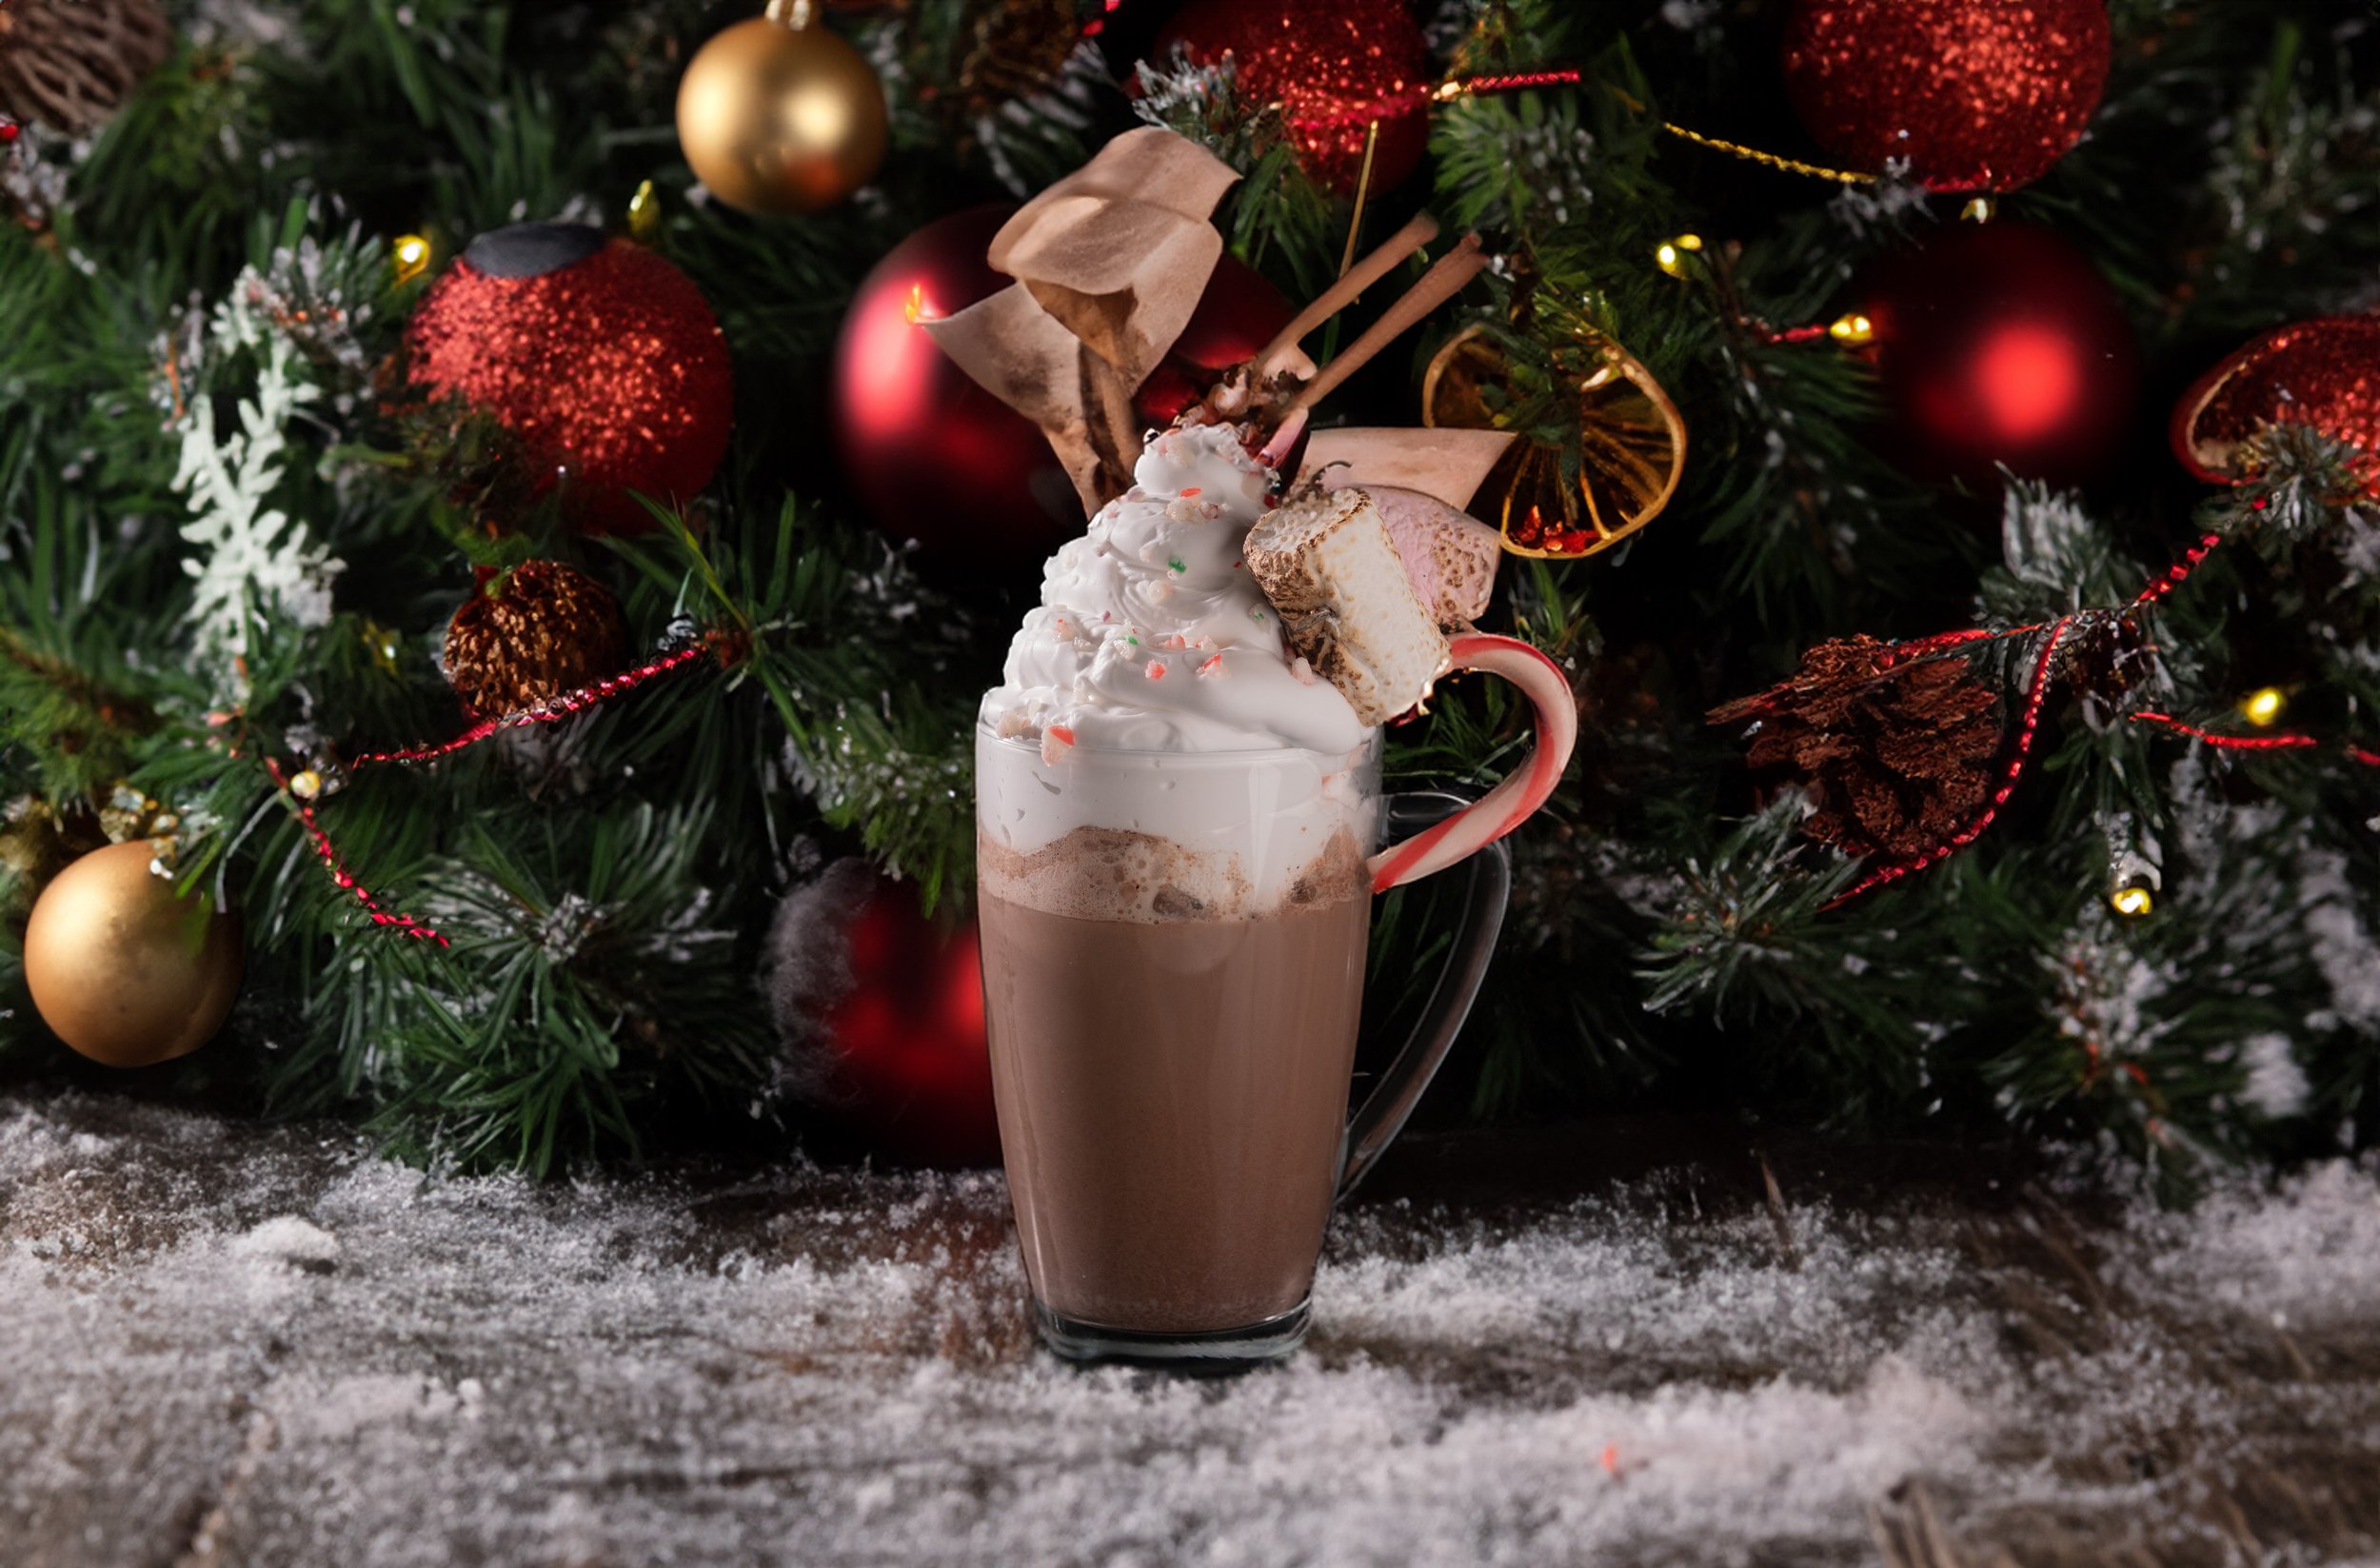 Mums are showing off their hot chocolate stations ahead of December & they  look incredible